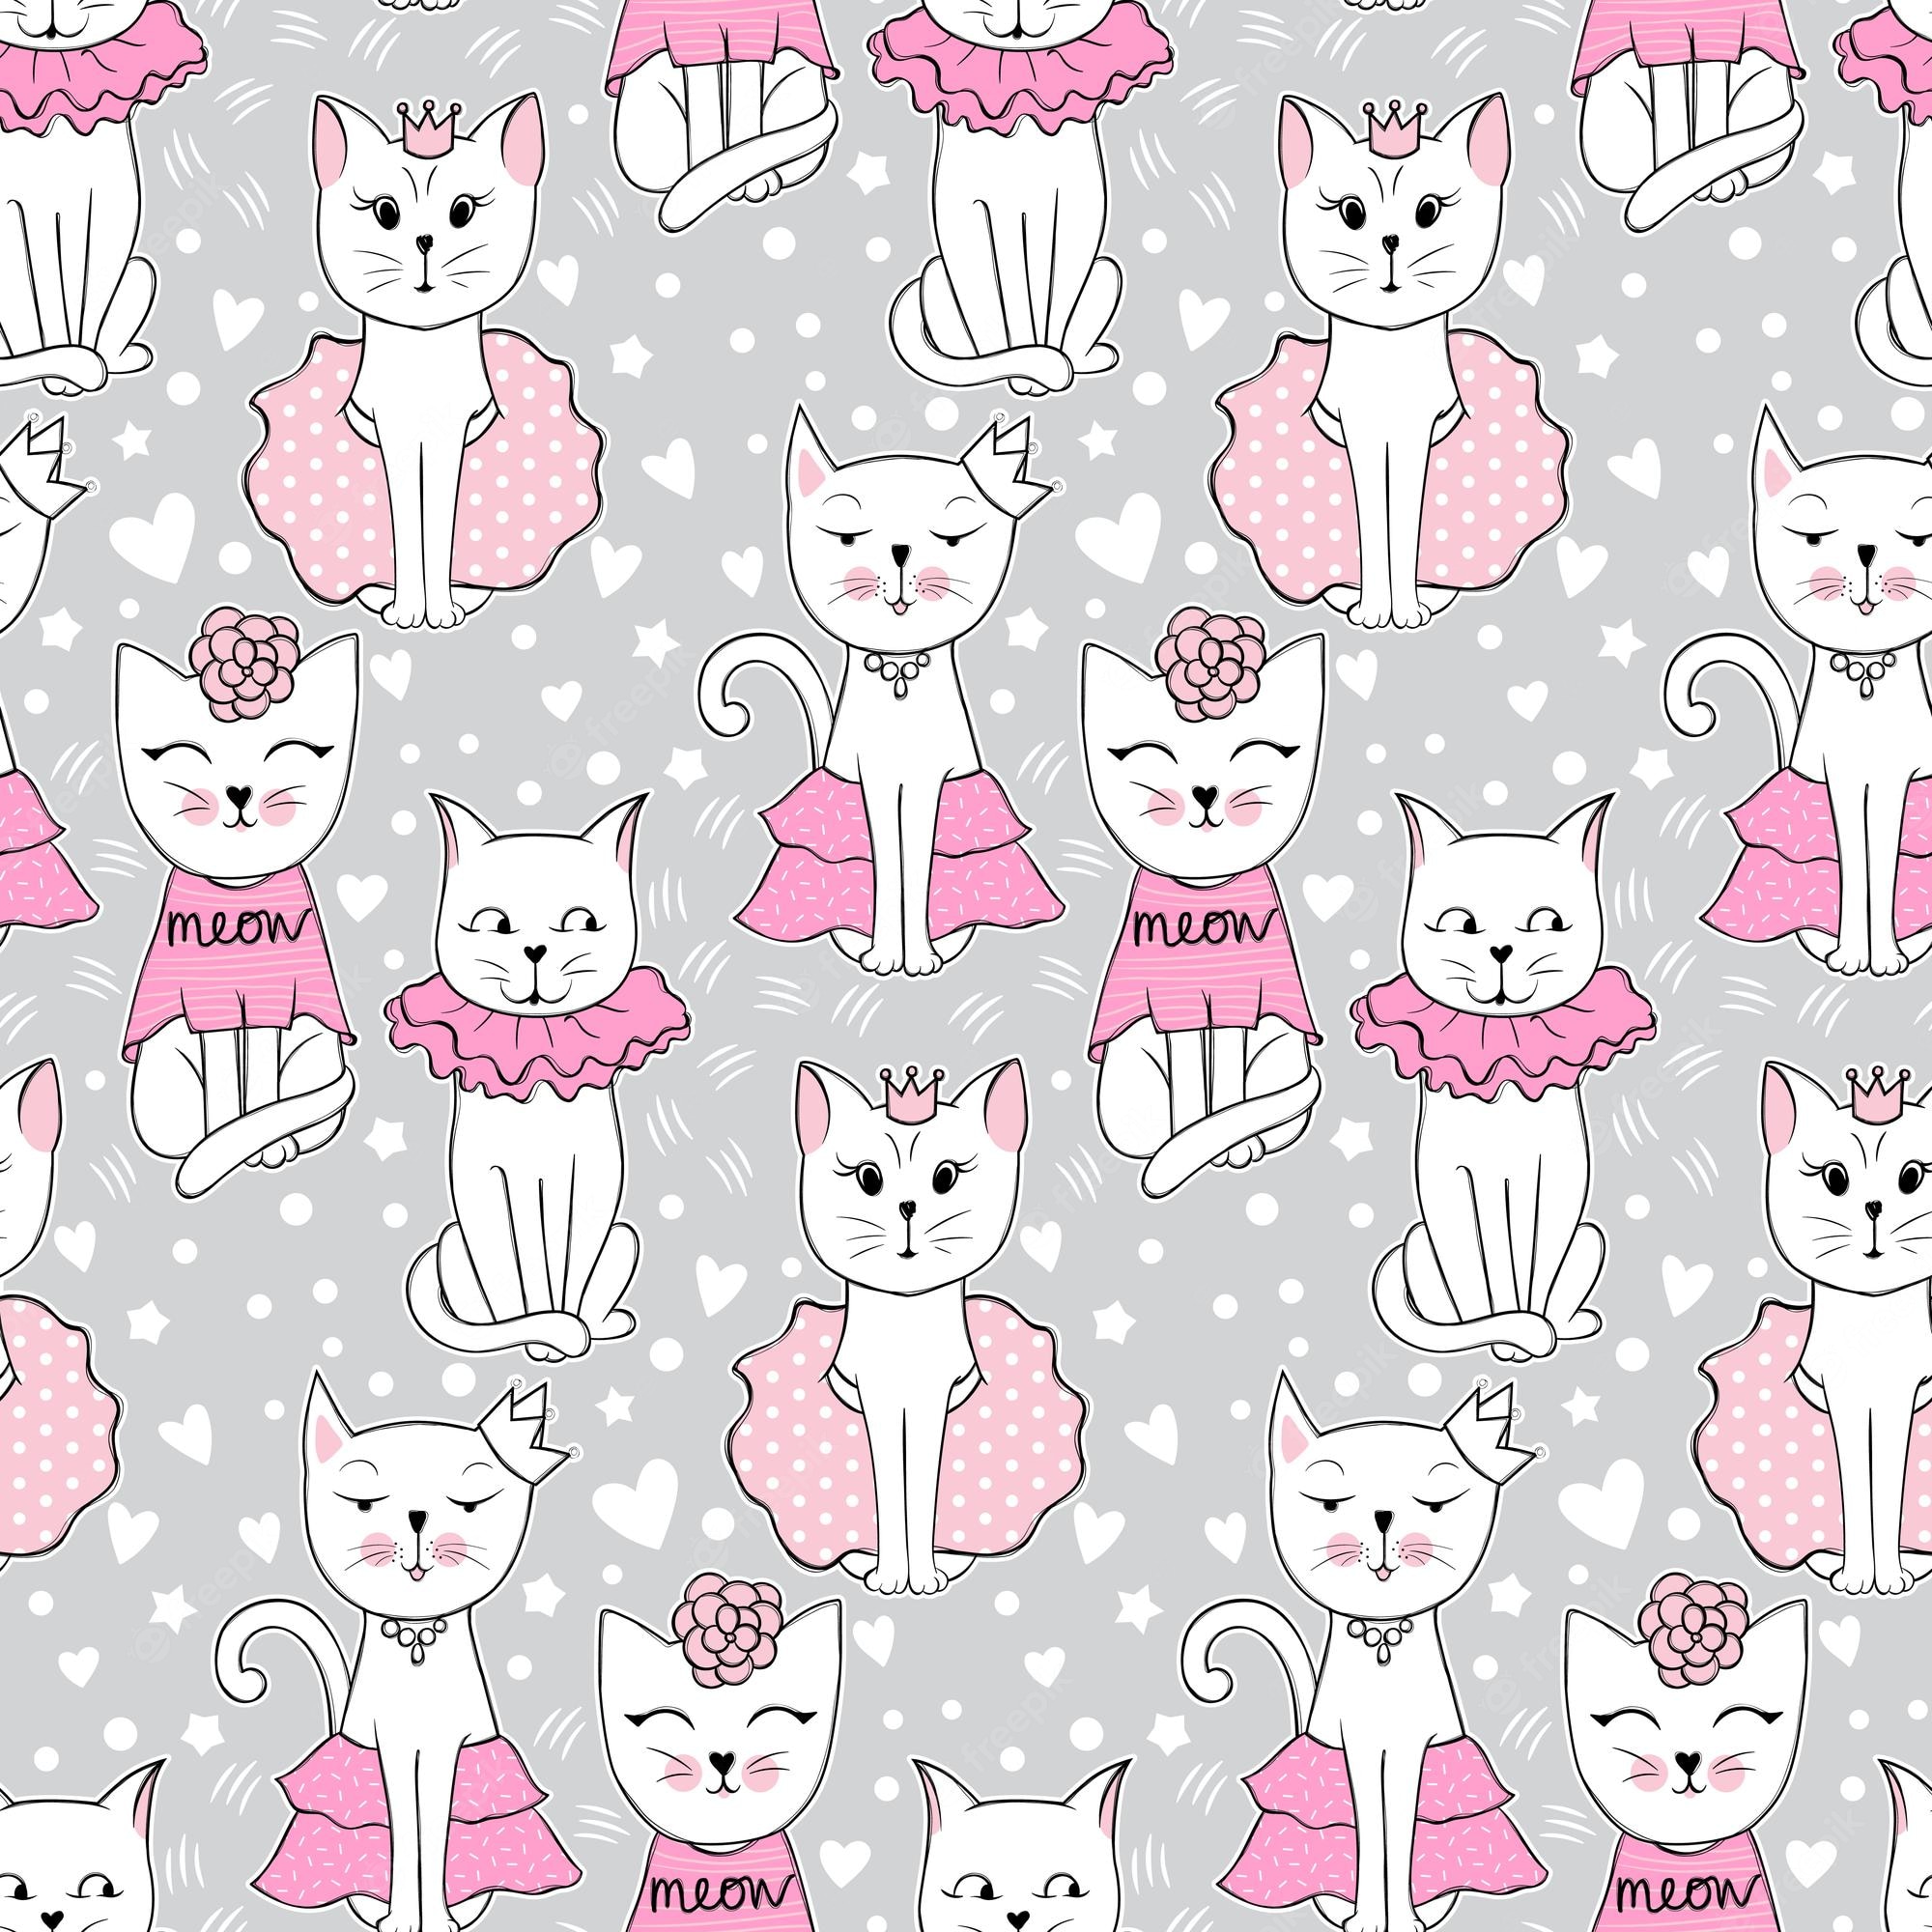 Premium Vector. Vector Funny Cat Seamless Pattern. Cute Kitten Hand Drawn Illustration. Stylish Cartoon Animals Background. Ideal For Fabric, Wallpaper, Wrapping Paper, Textile, Bedding, T Shirt Print